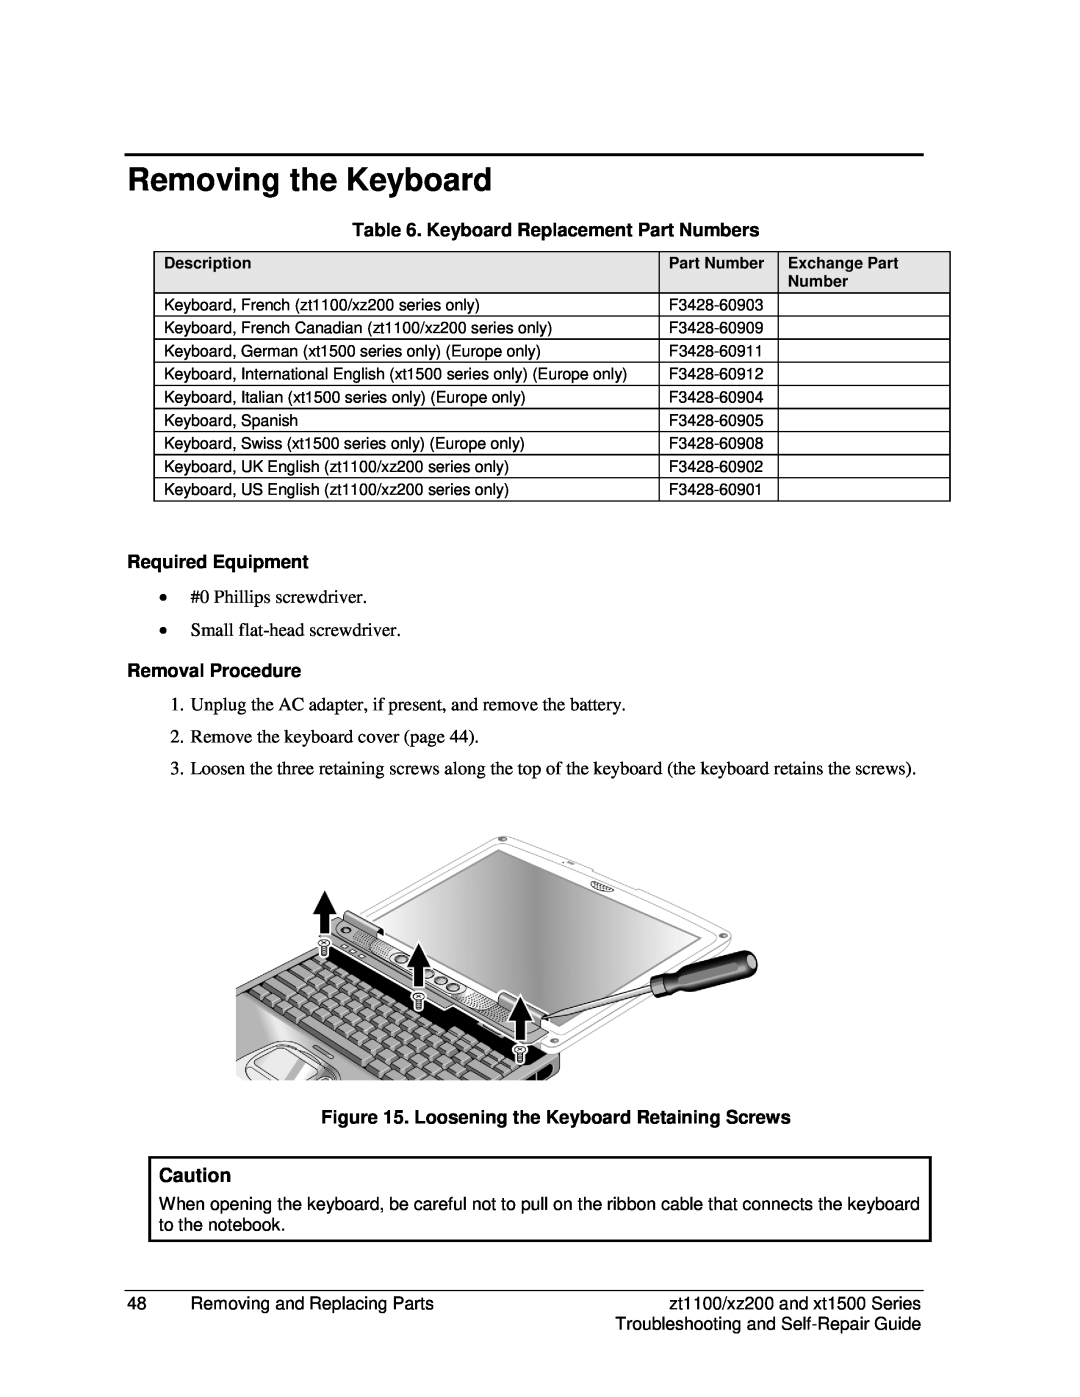 3D Connexion ZT1000, XZ200 Removing the Keyboard, Keyboard Replacement Part Numbers, Required Equipment, Removal Procedure 